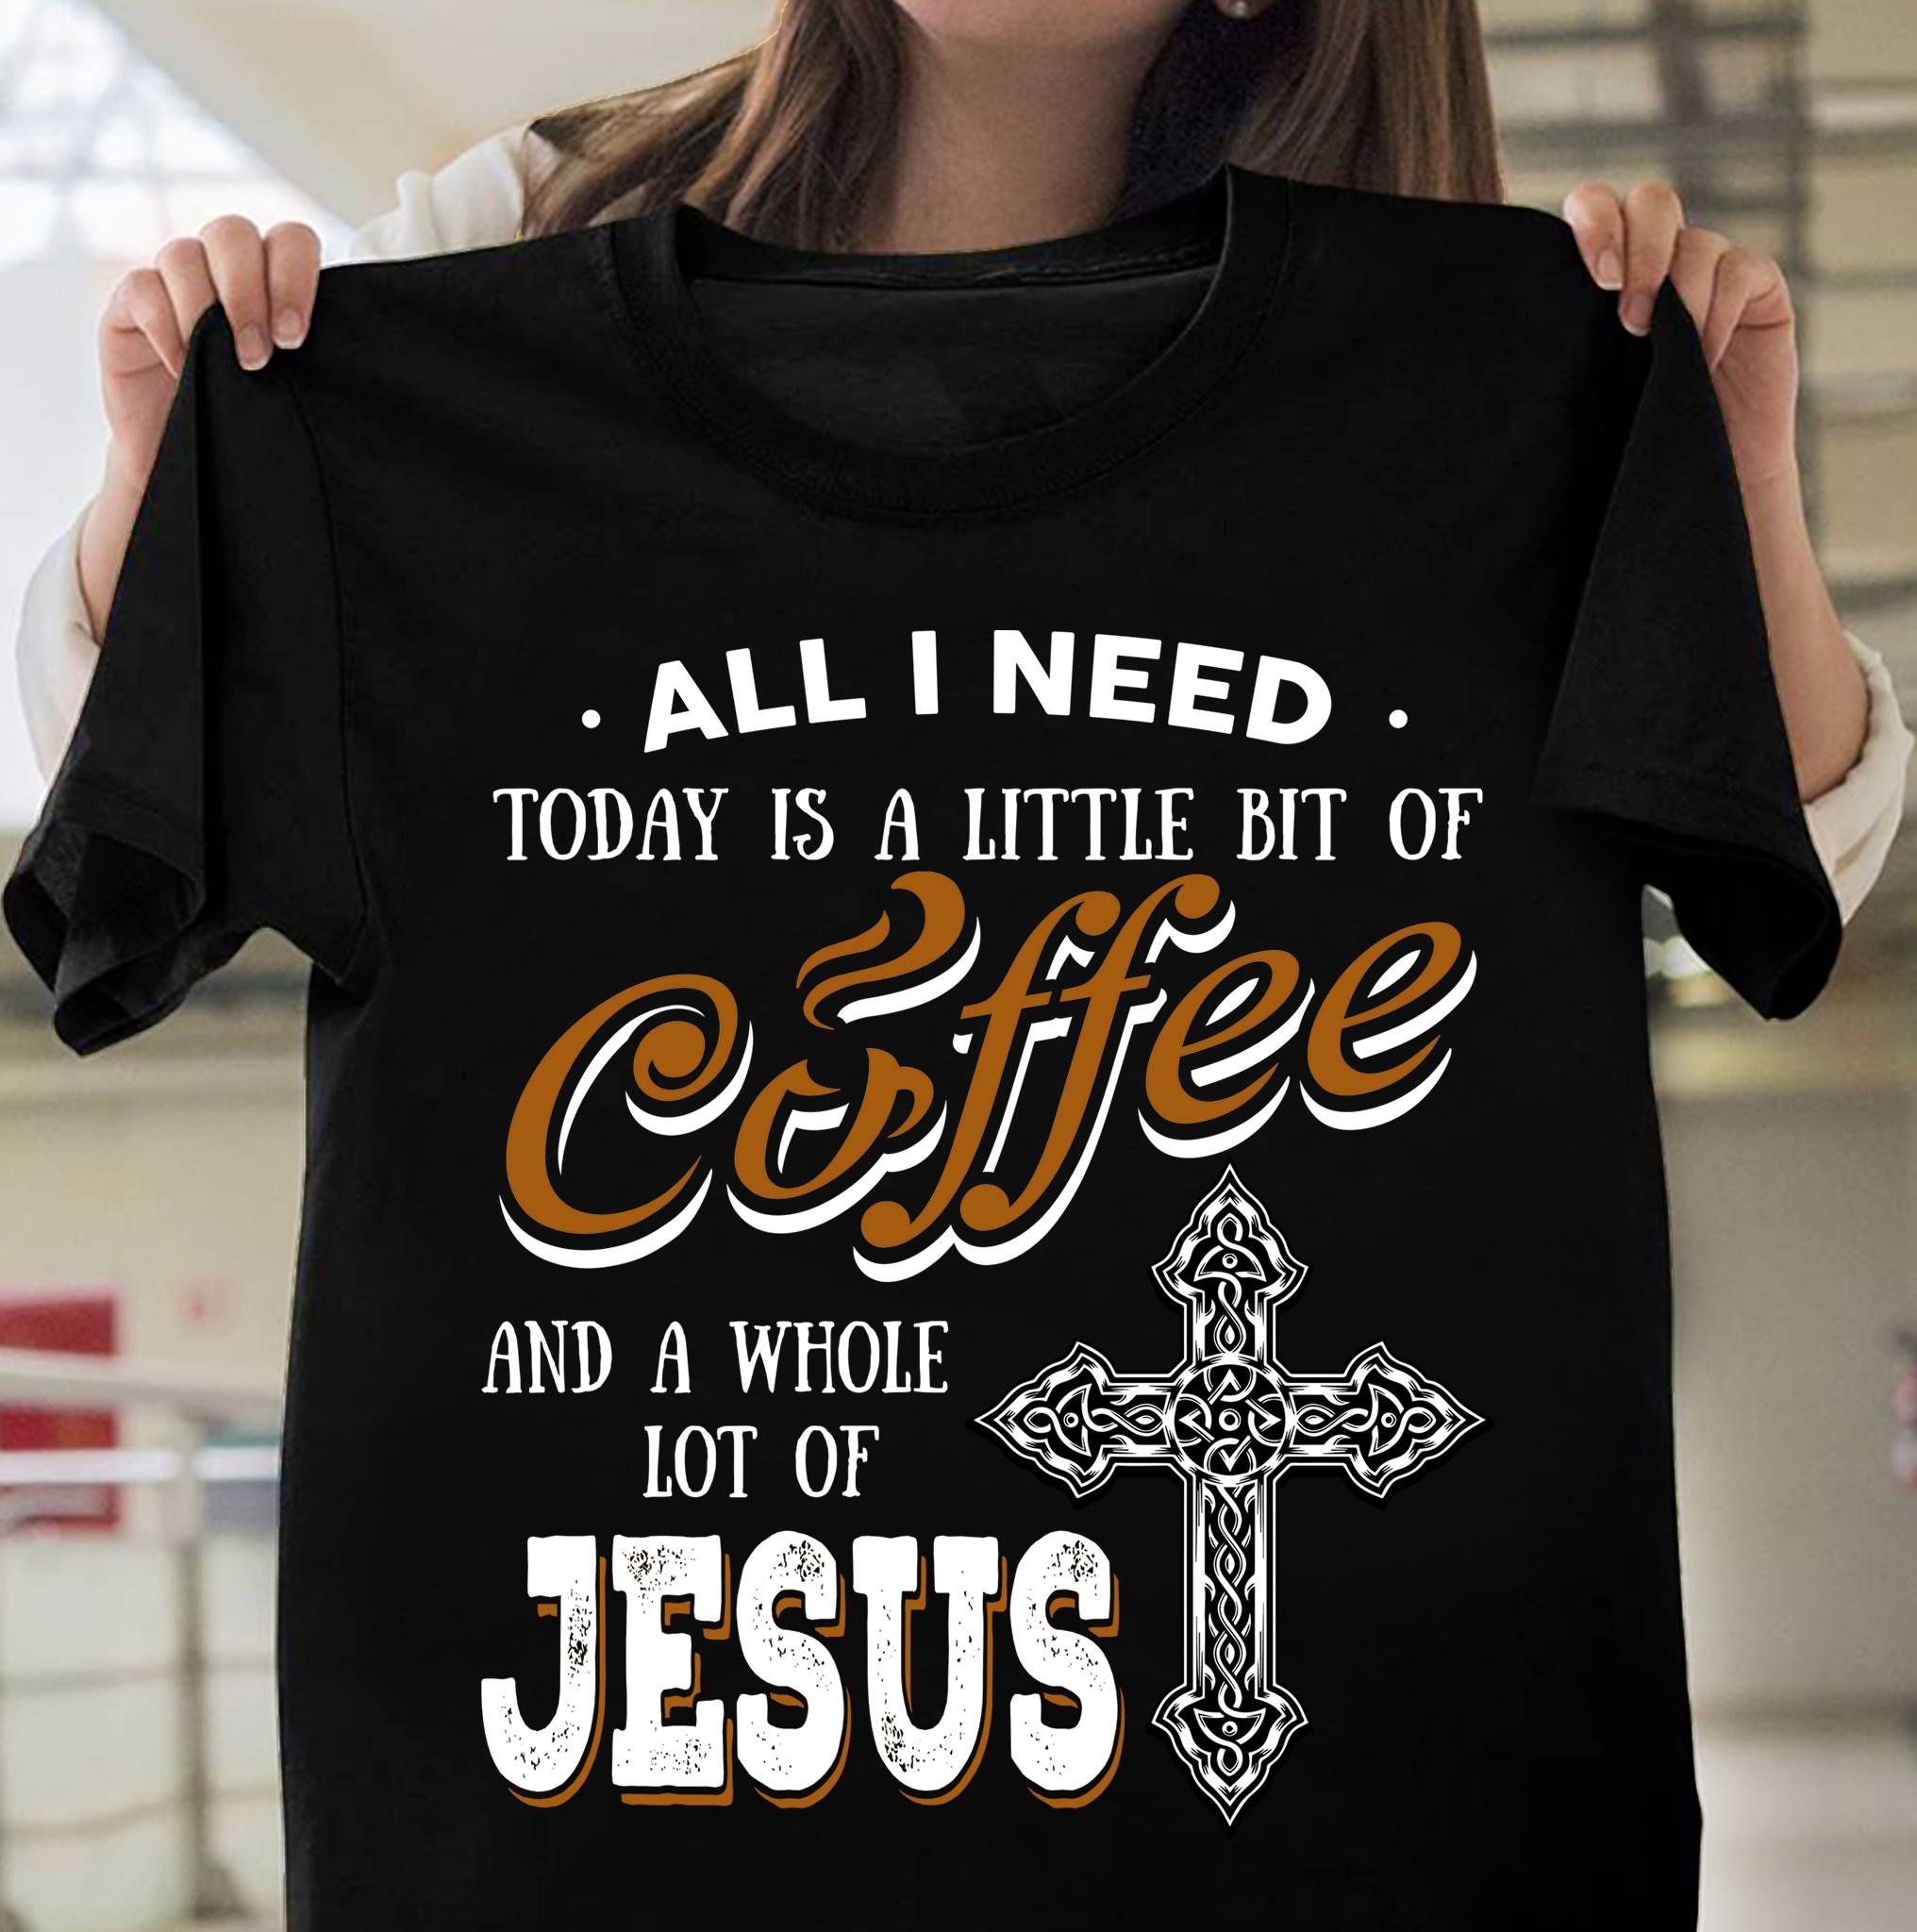 All I need today is a little bit coffee and a whole lot of Jesus